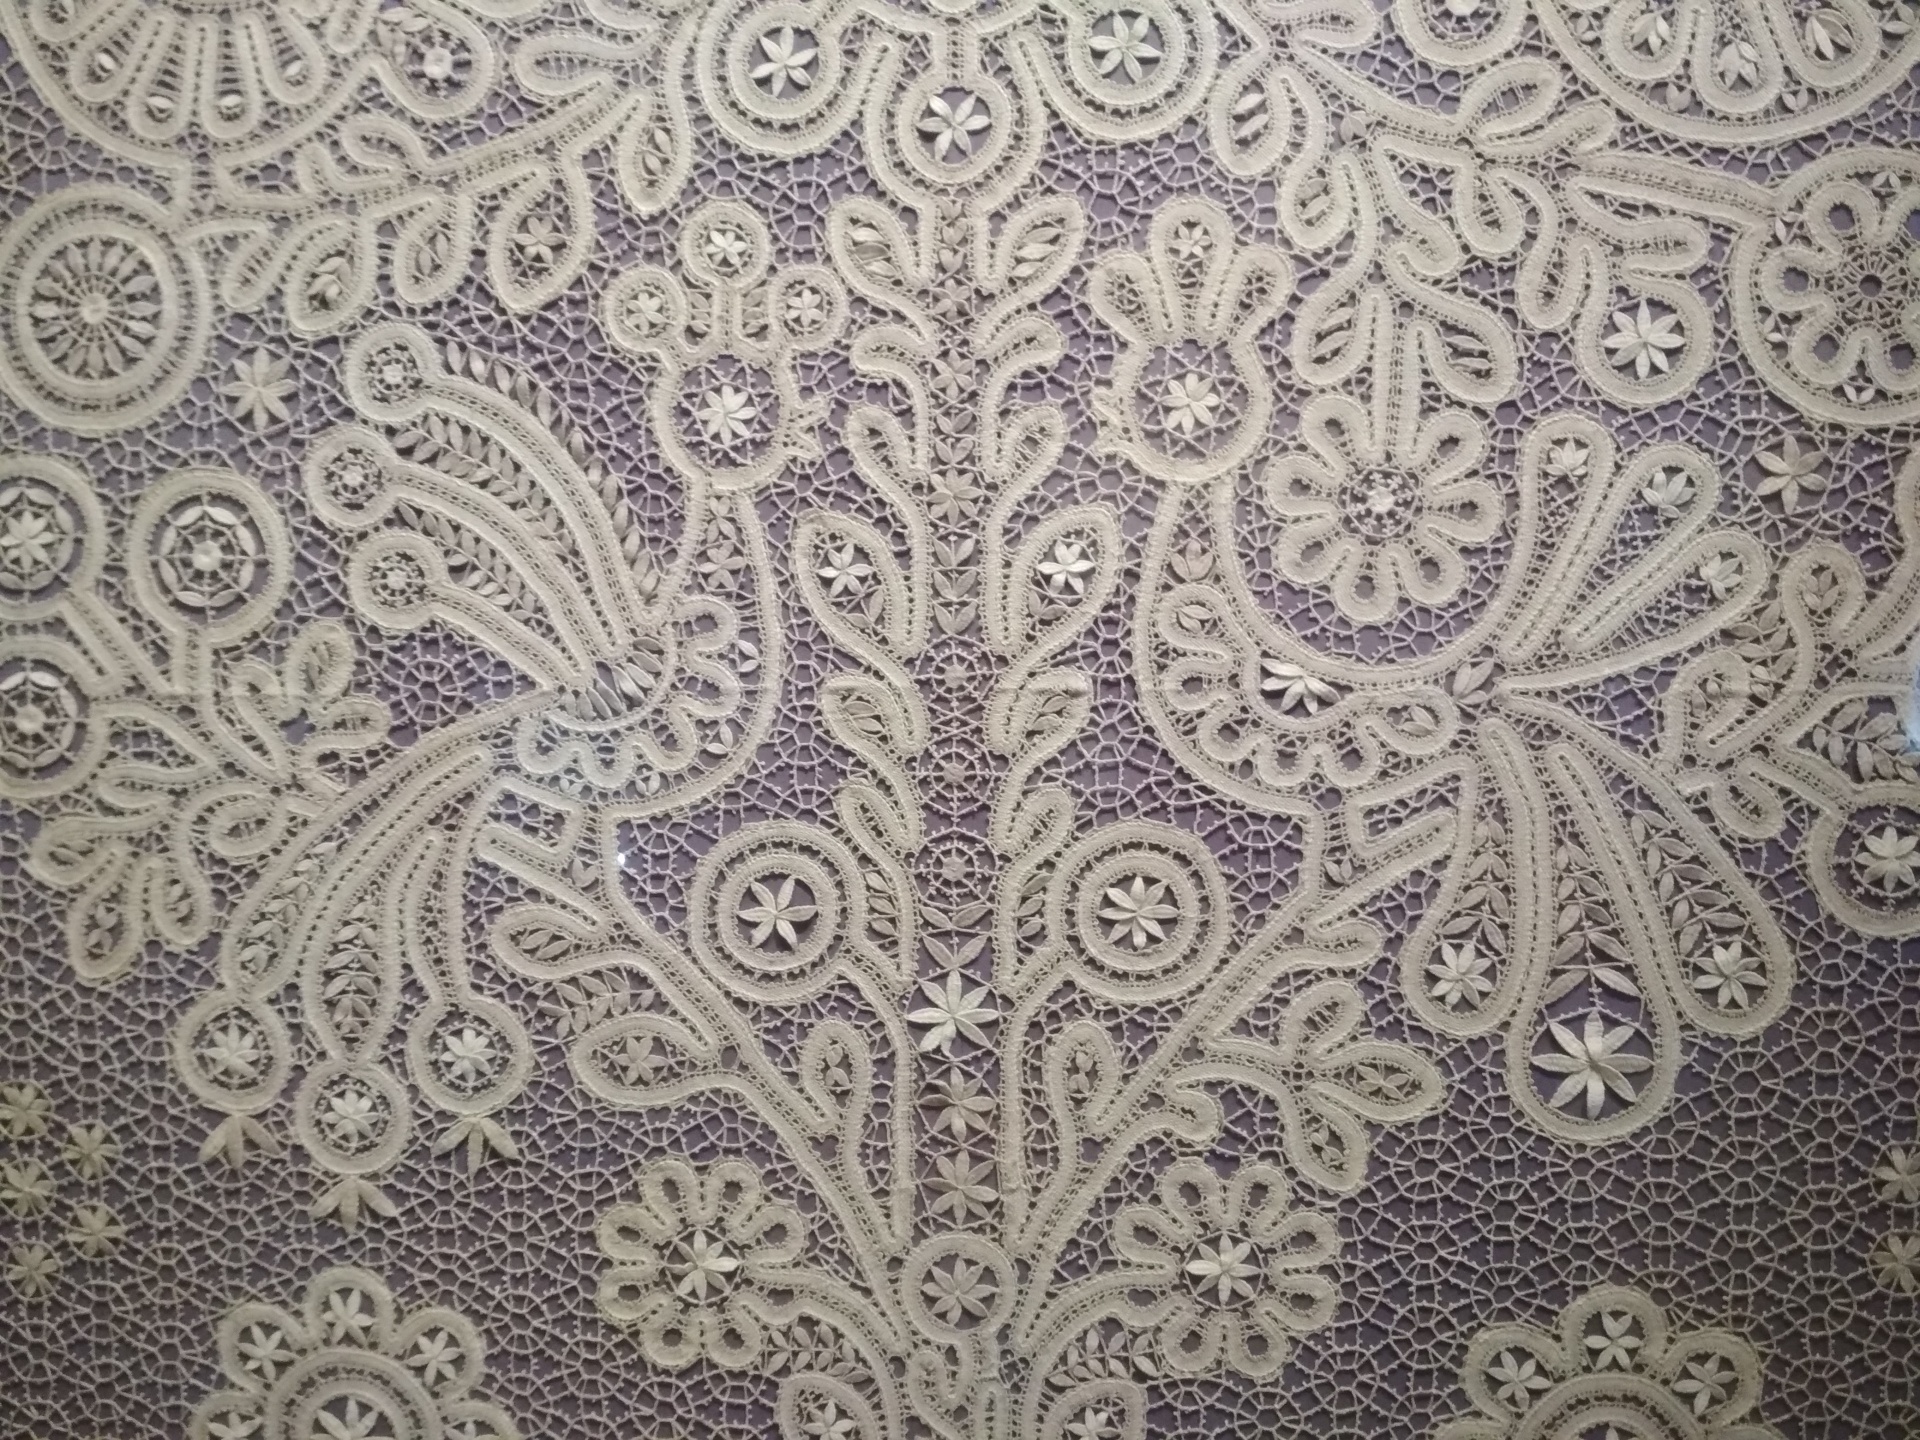 Fragment of a panel lace